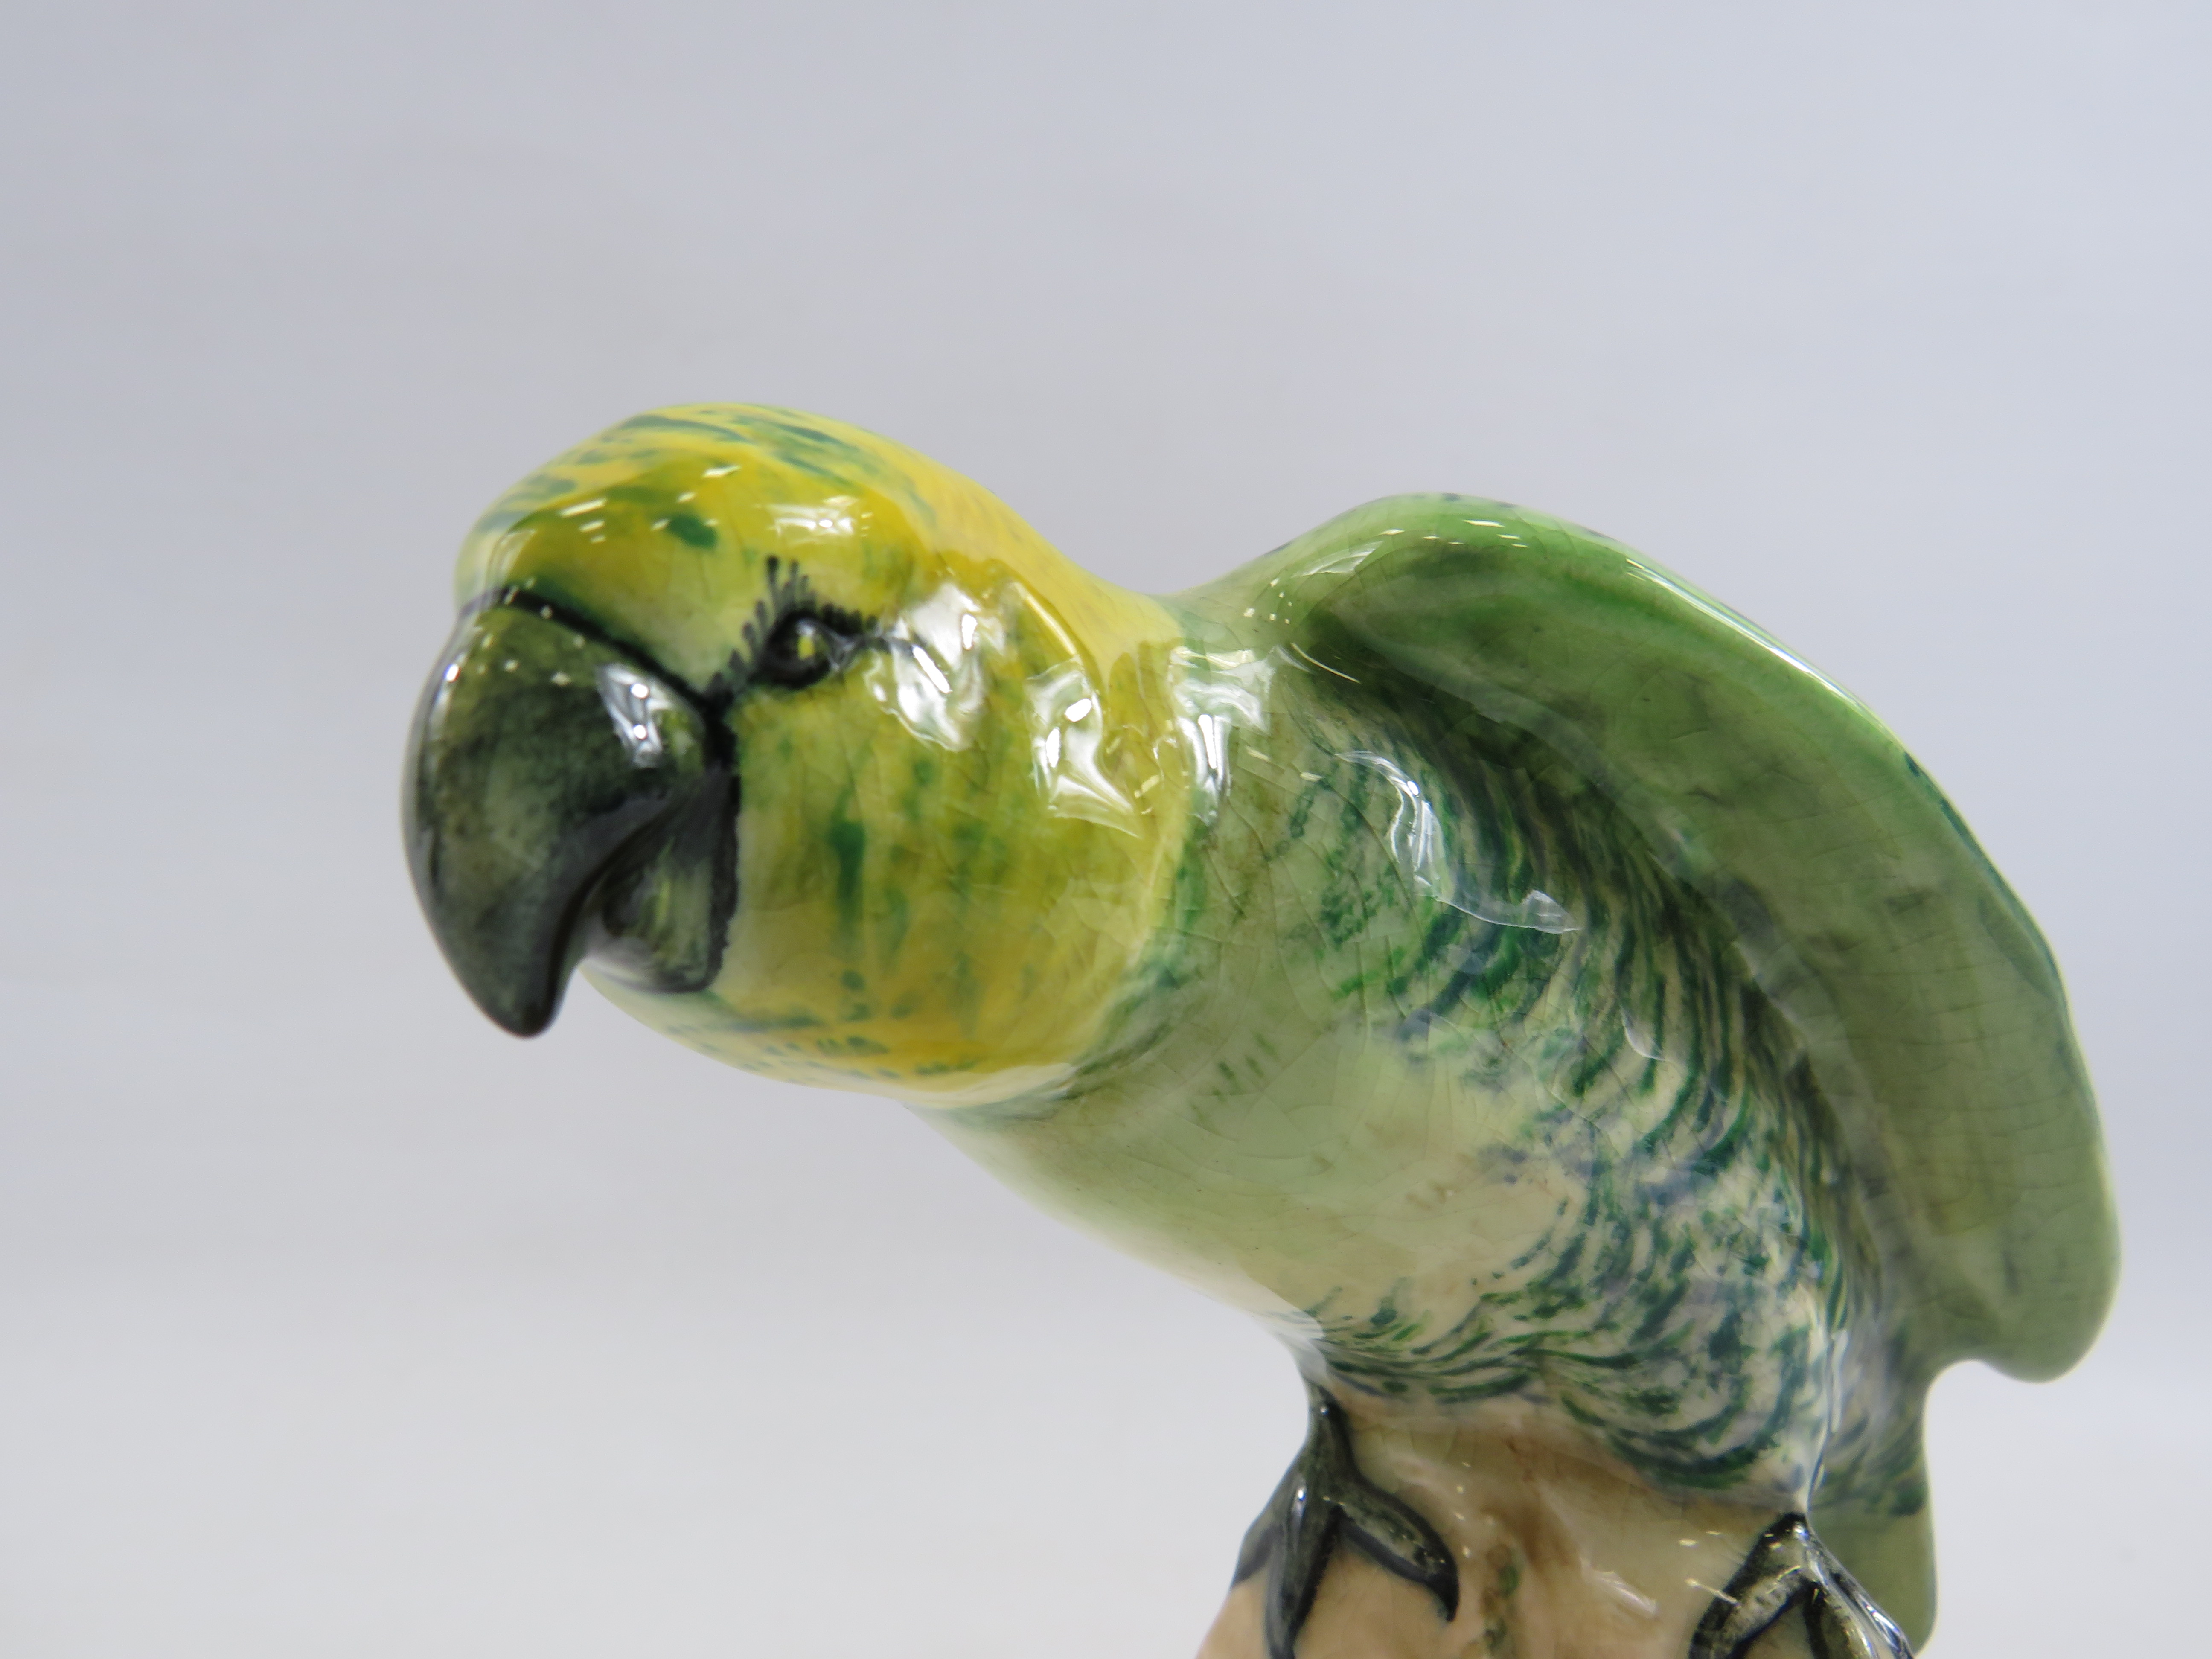 Beswick green parrot figurine, model no 930. approx 6" tall. - Image 4 of 5